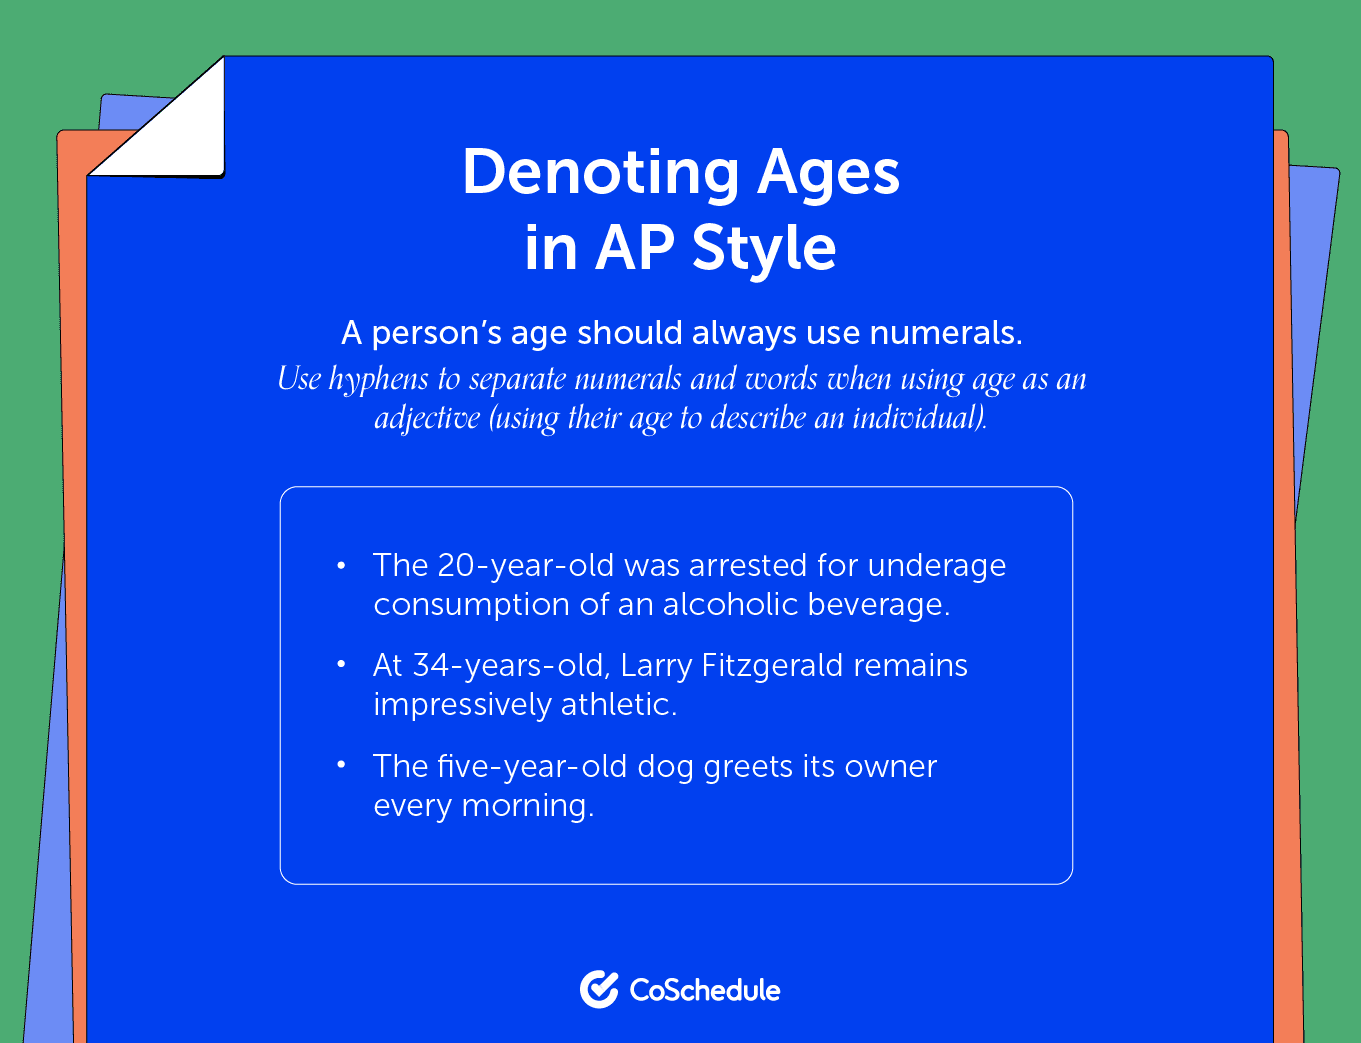 Denoting ages in AP style